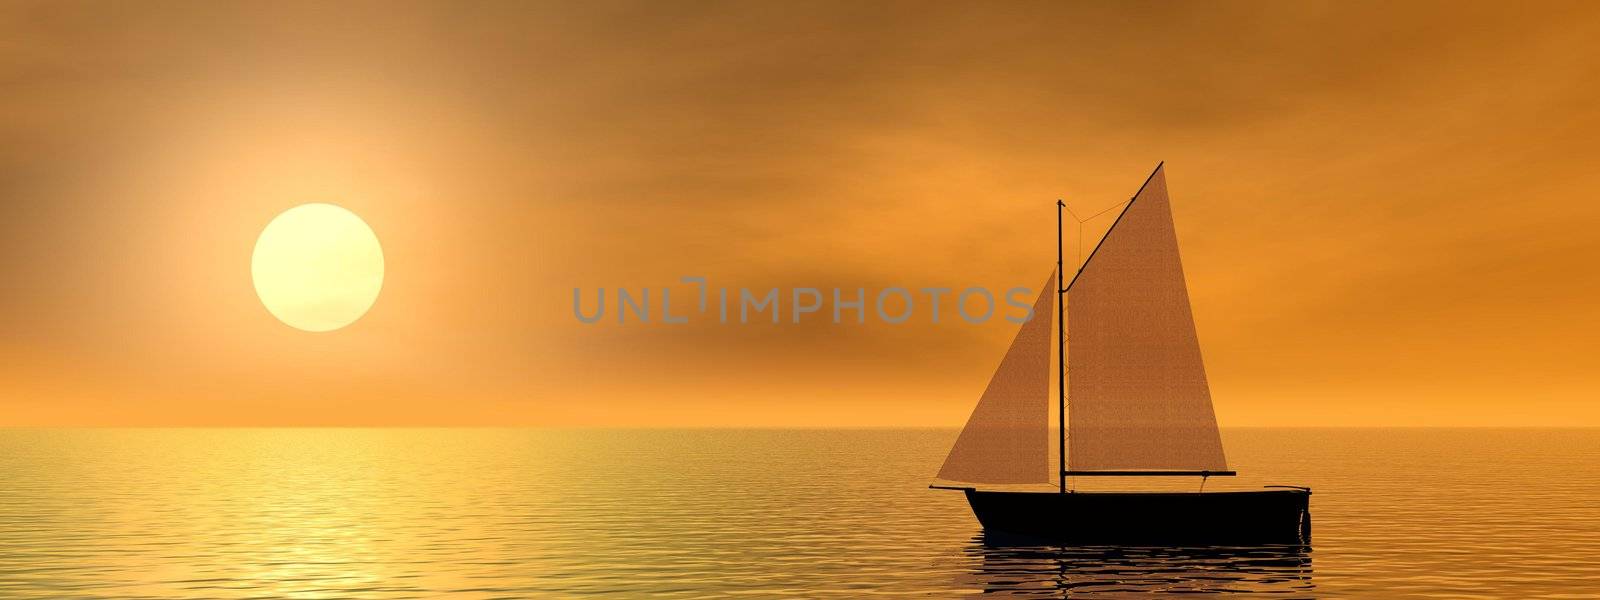 boat by mariephotos